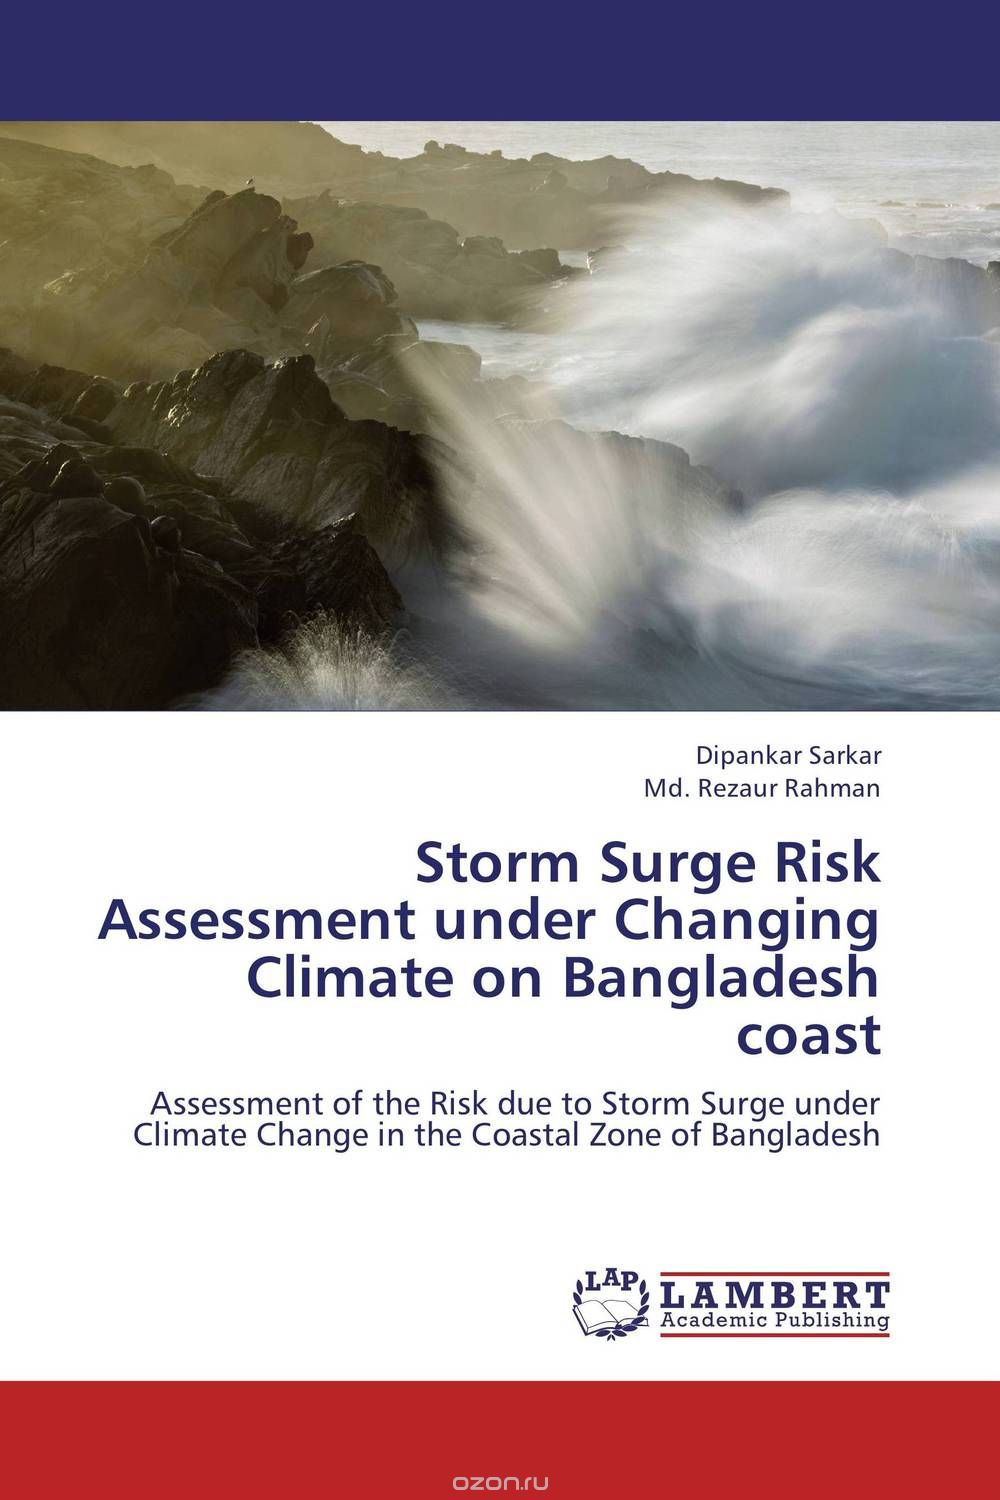 Storm Surge Risk Assessment under Changing Climate on Bangladesh coast